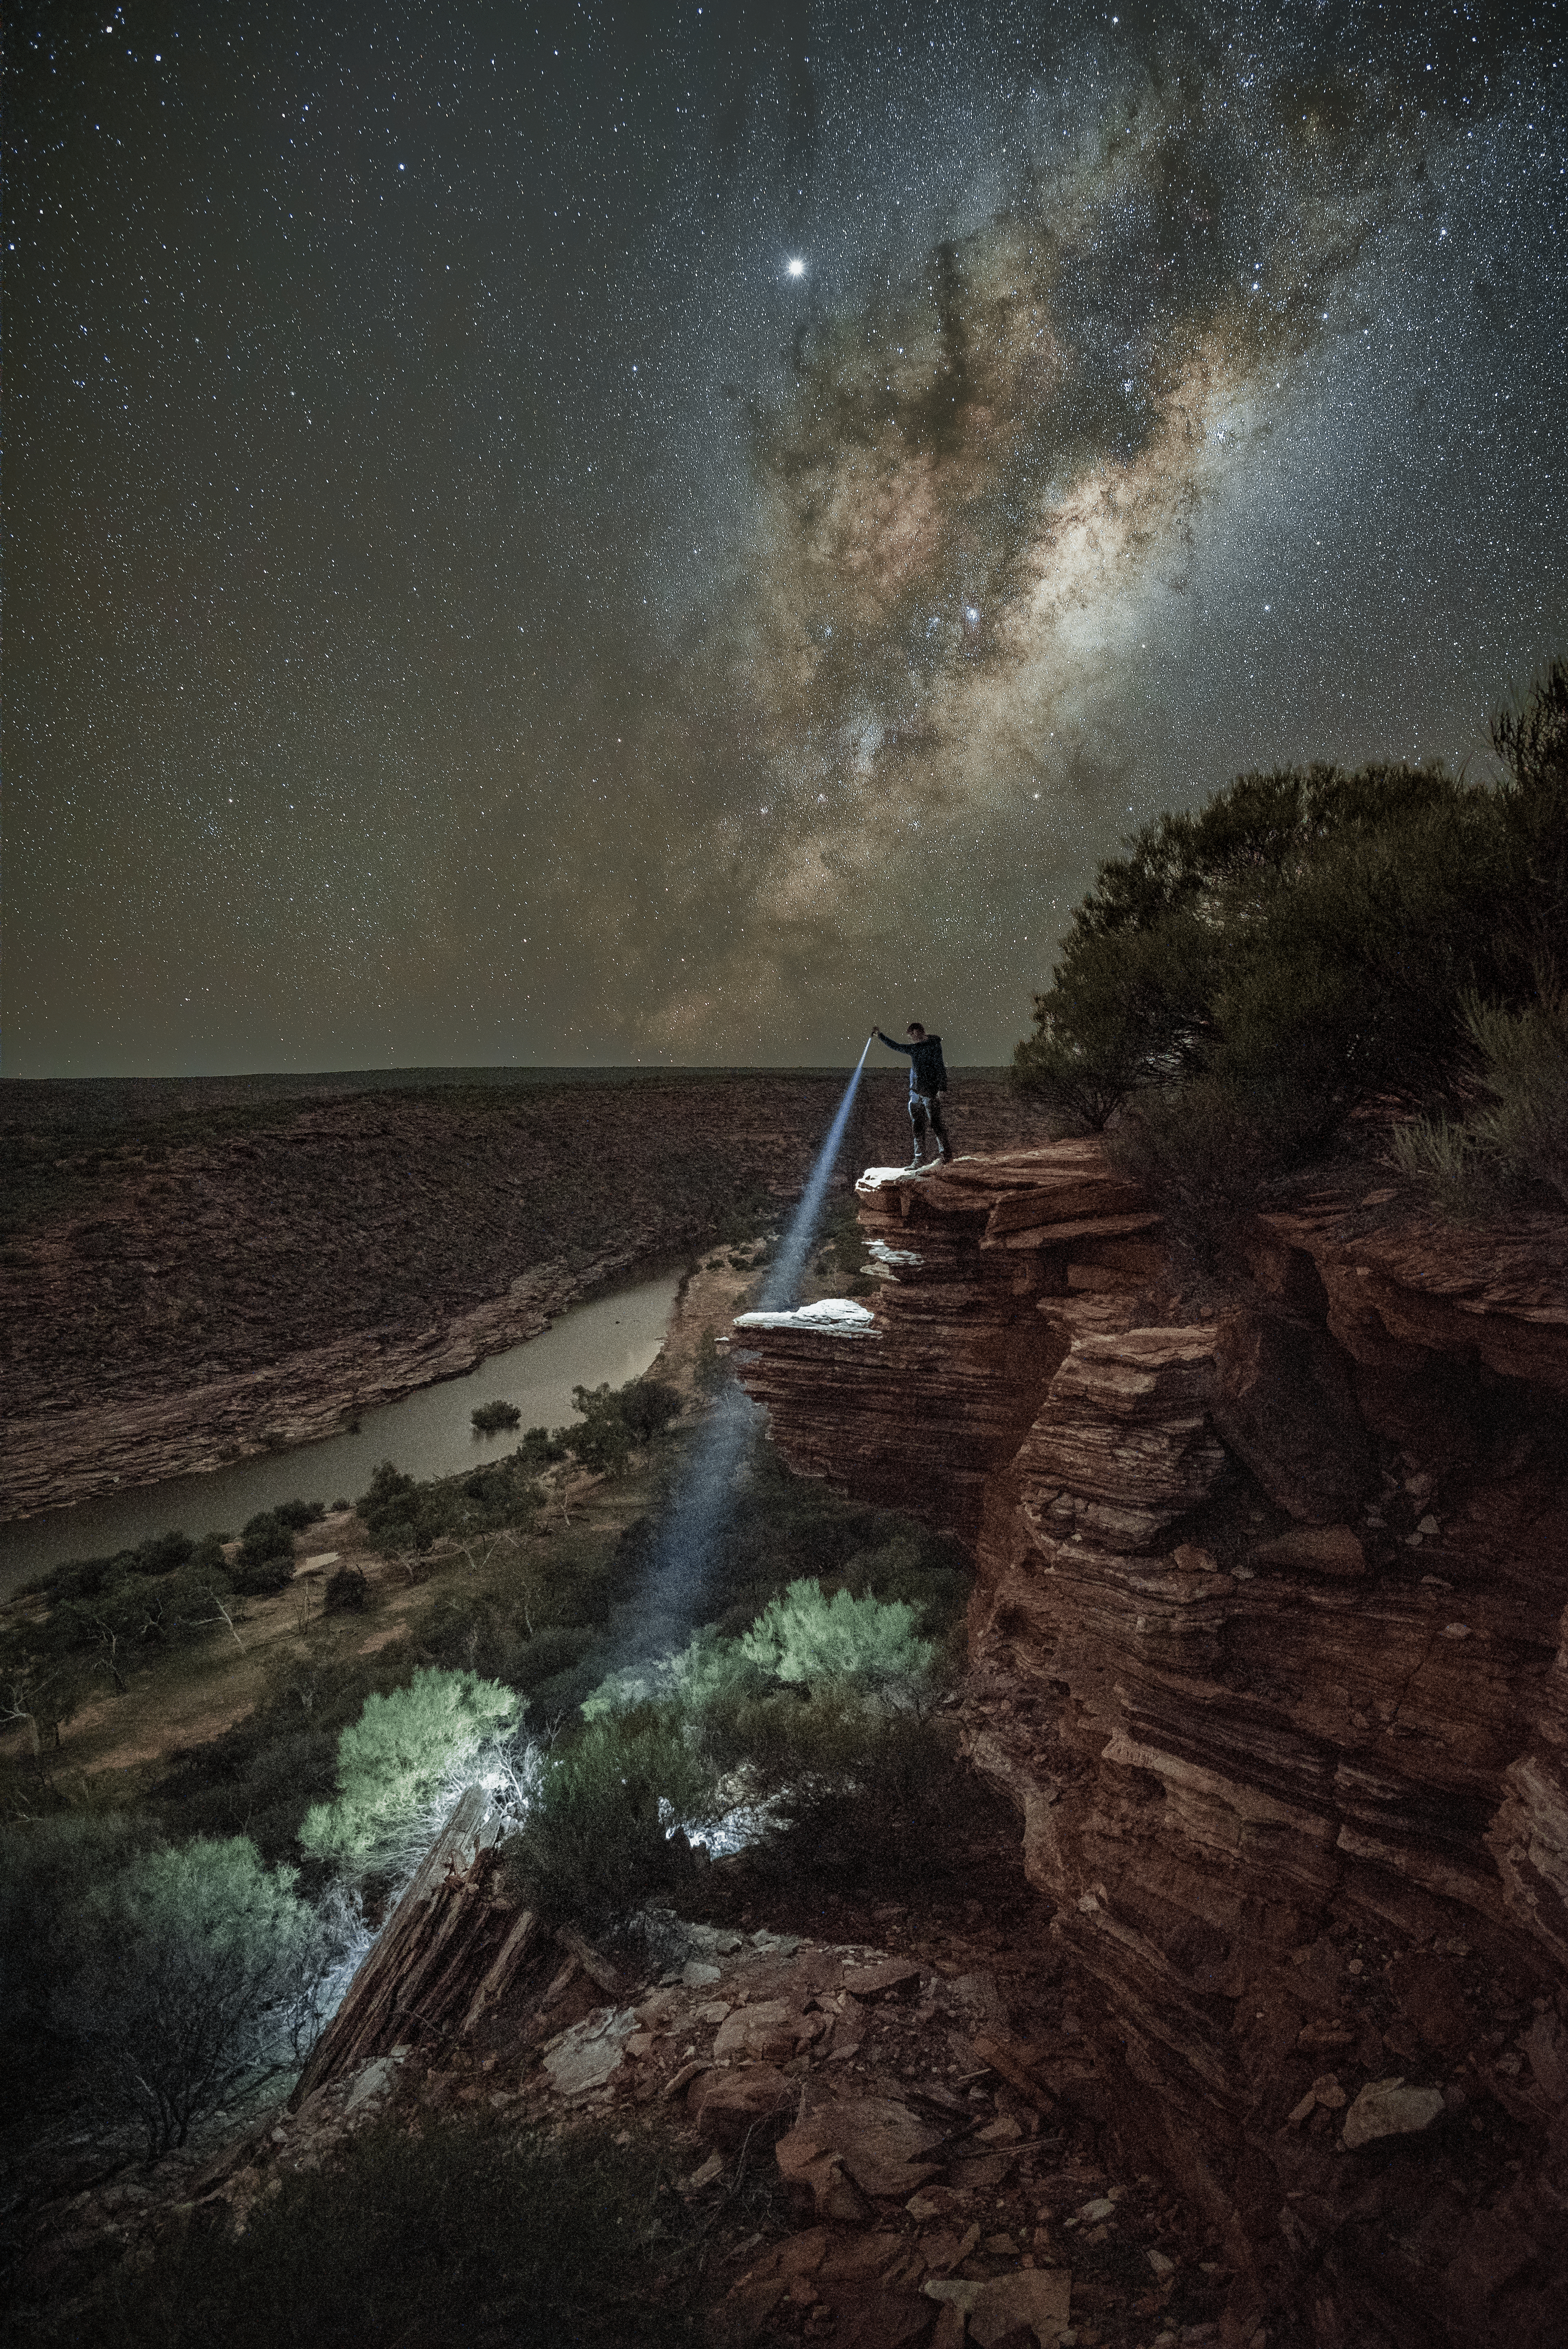 Our Milky Way - #9 The Gorge